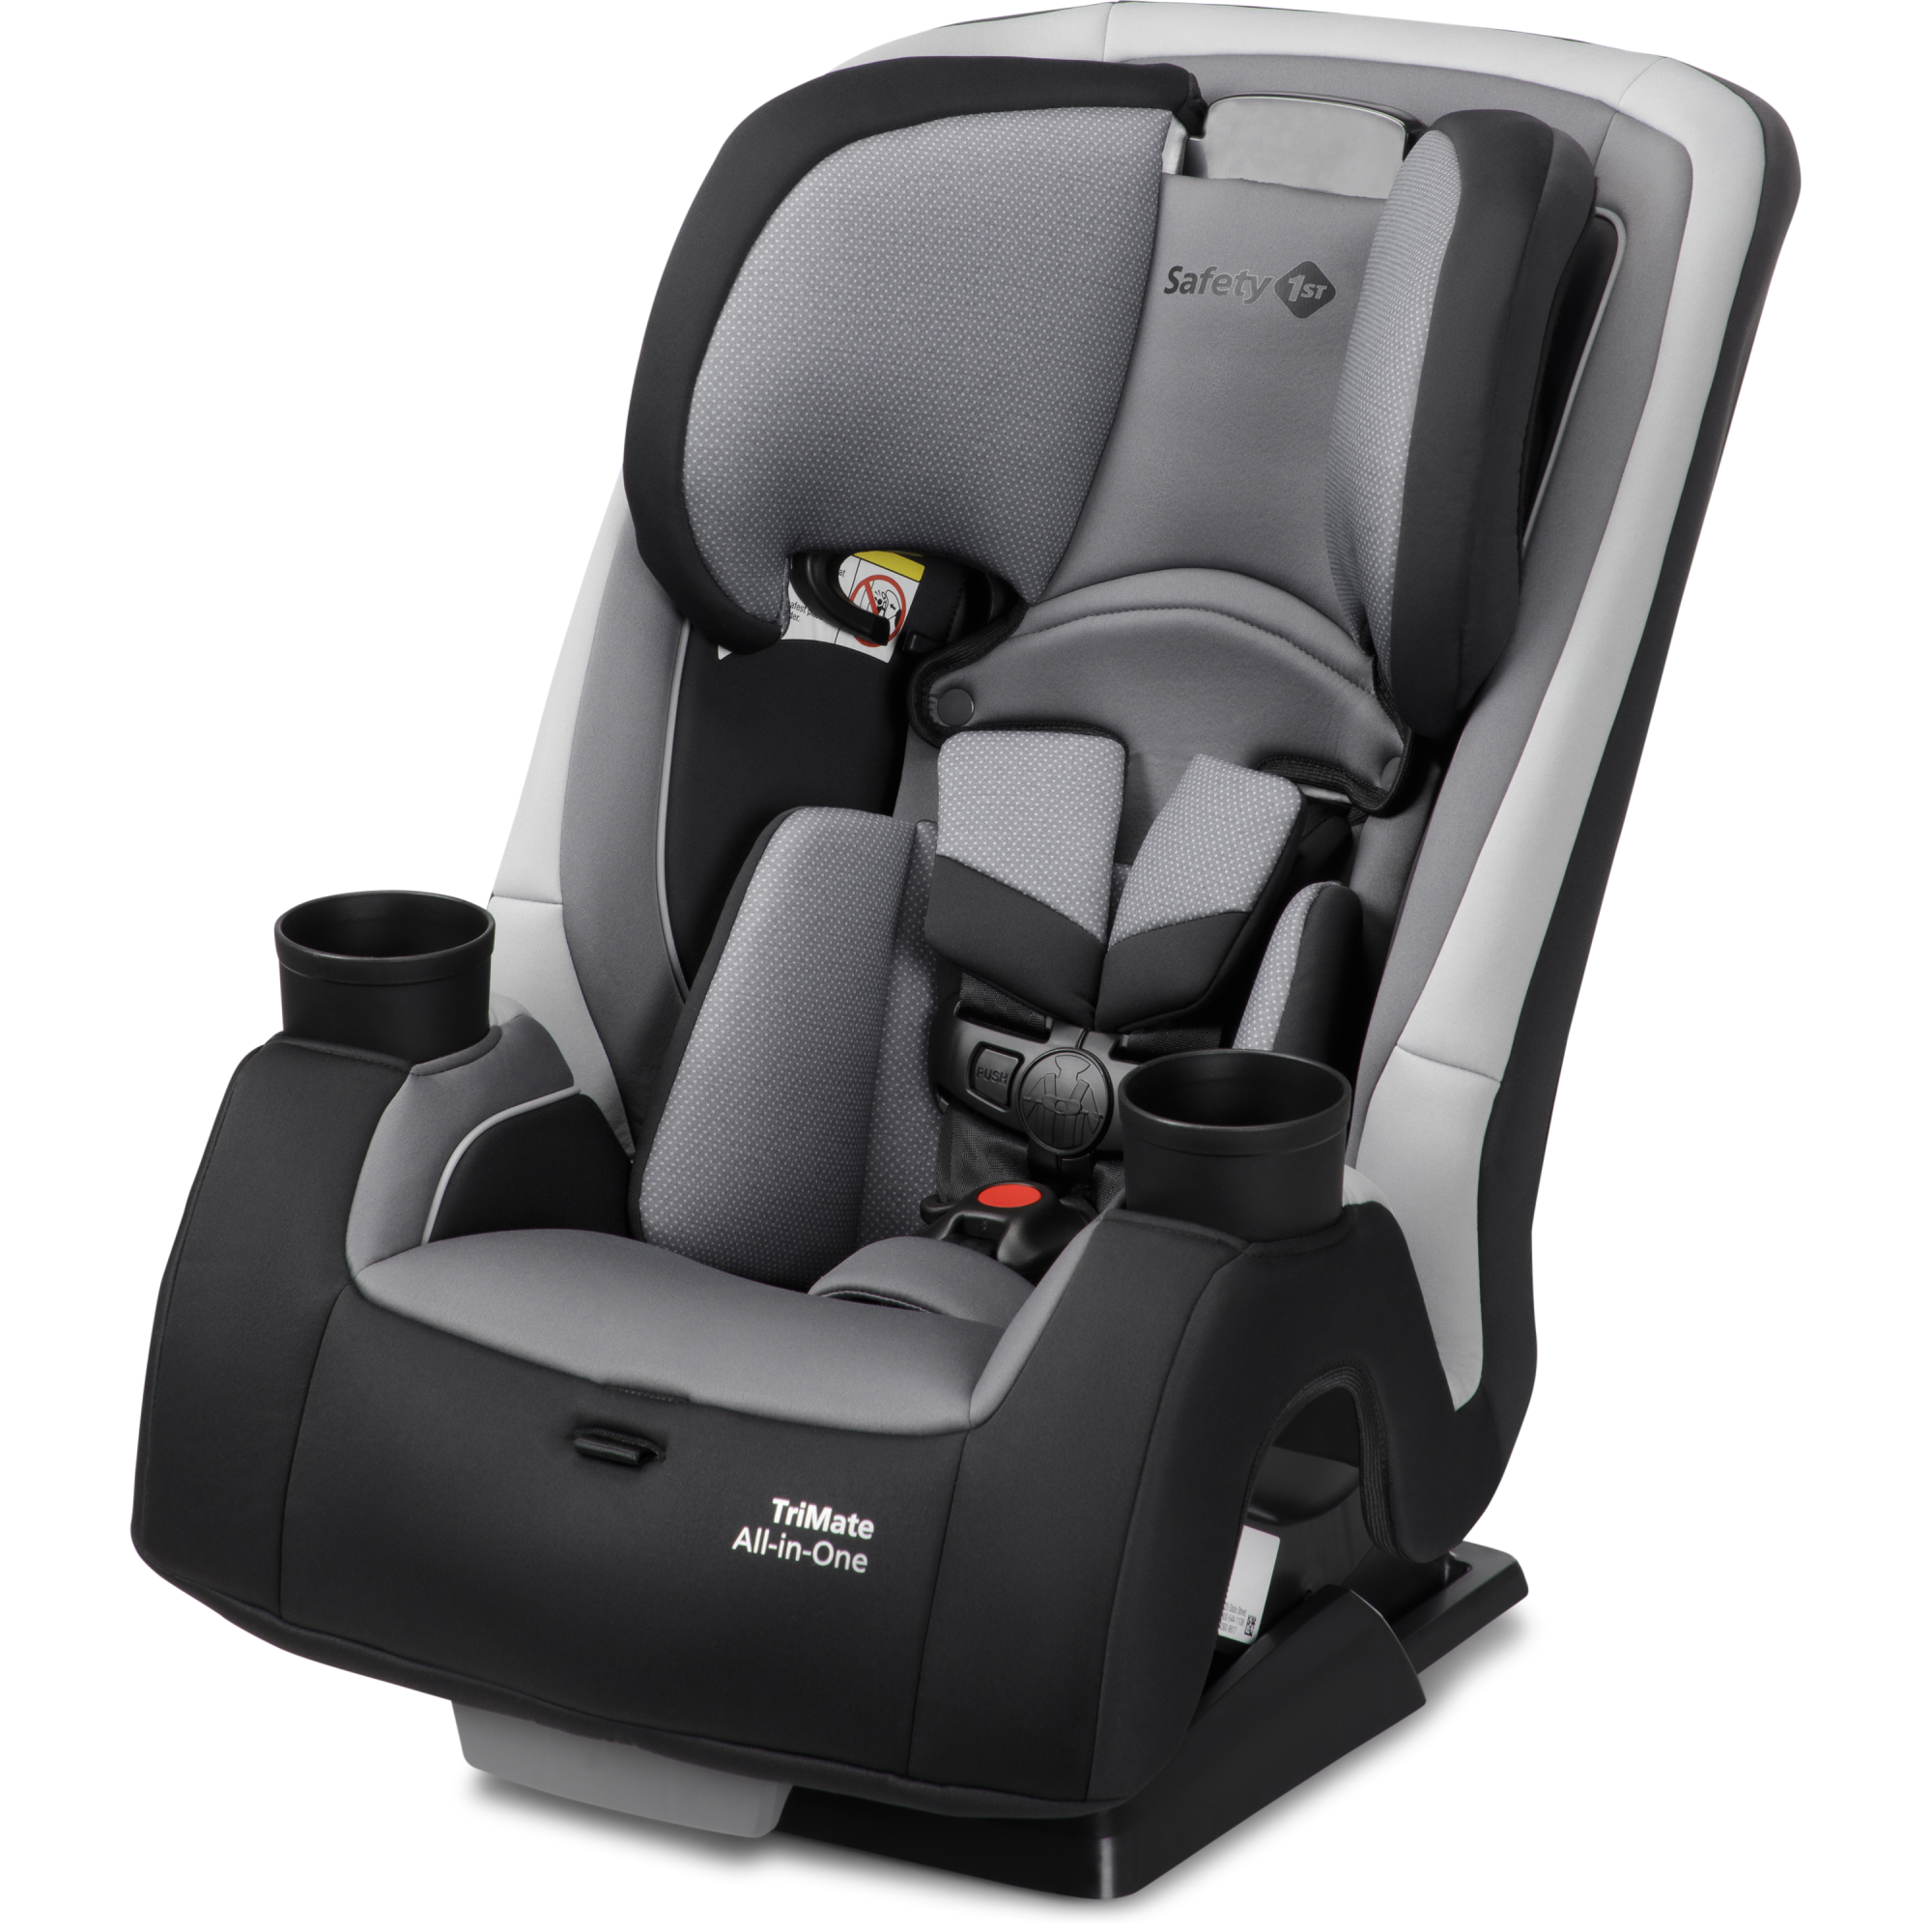 TriMate™ All-in-One Convertible Car Seat - High Street